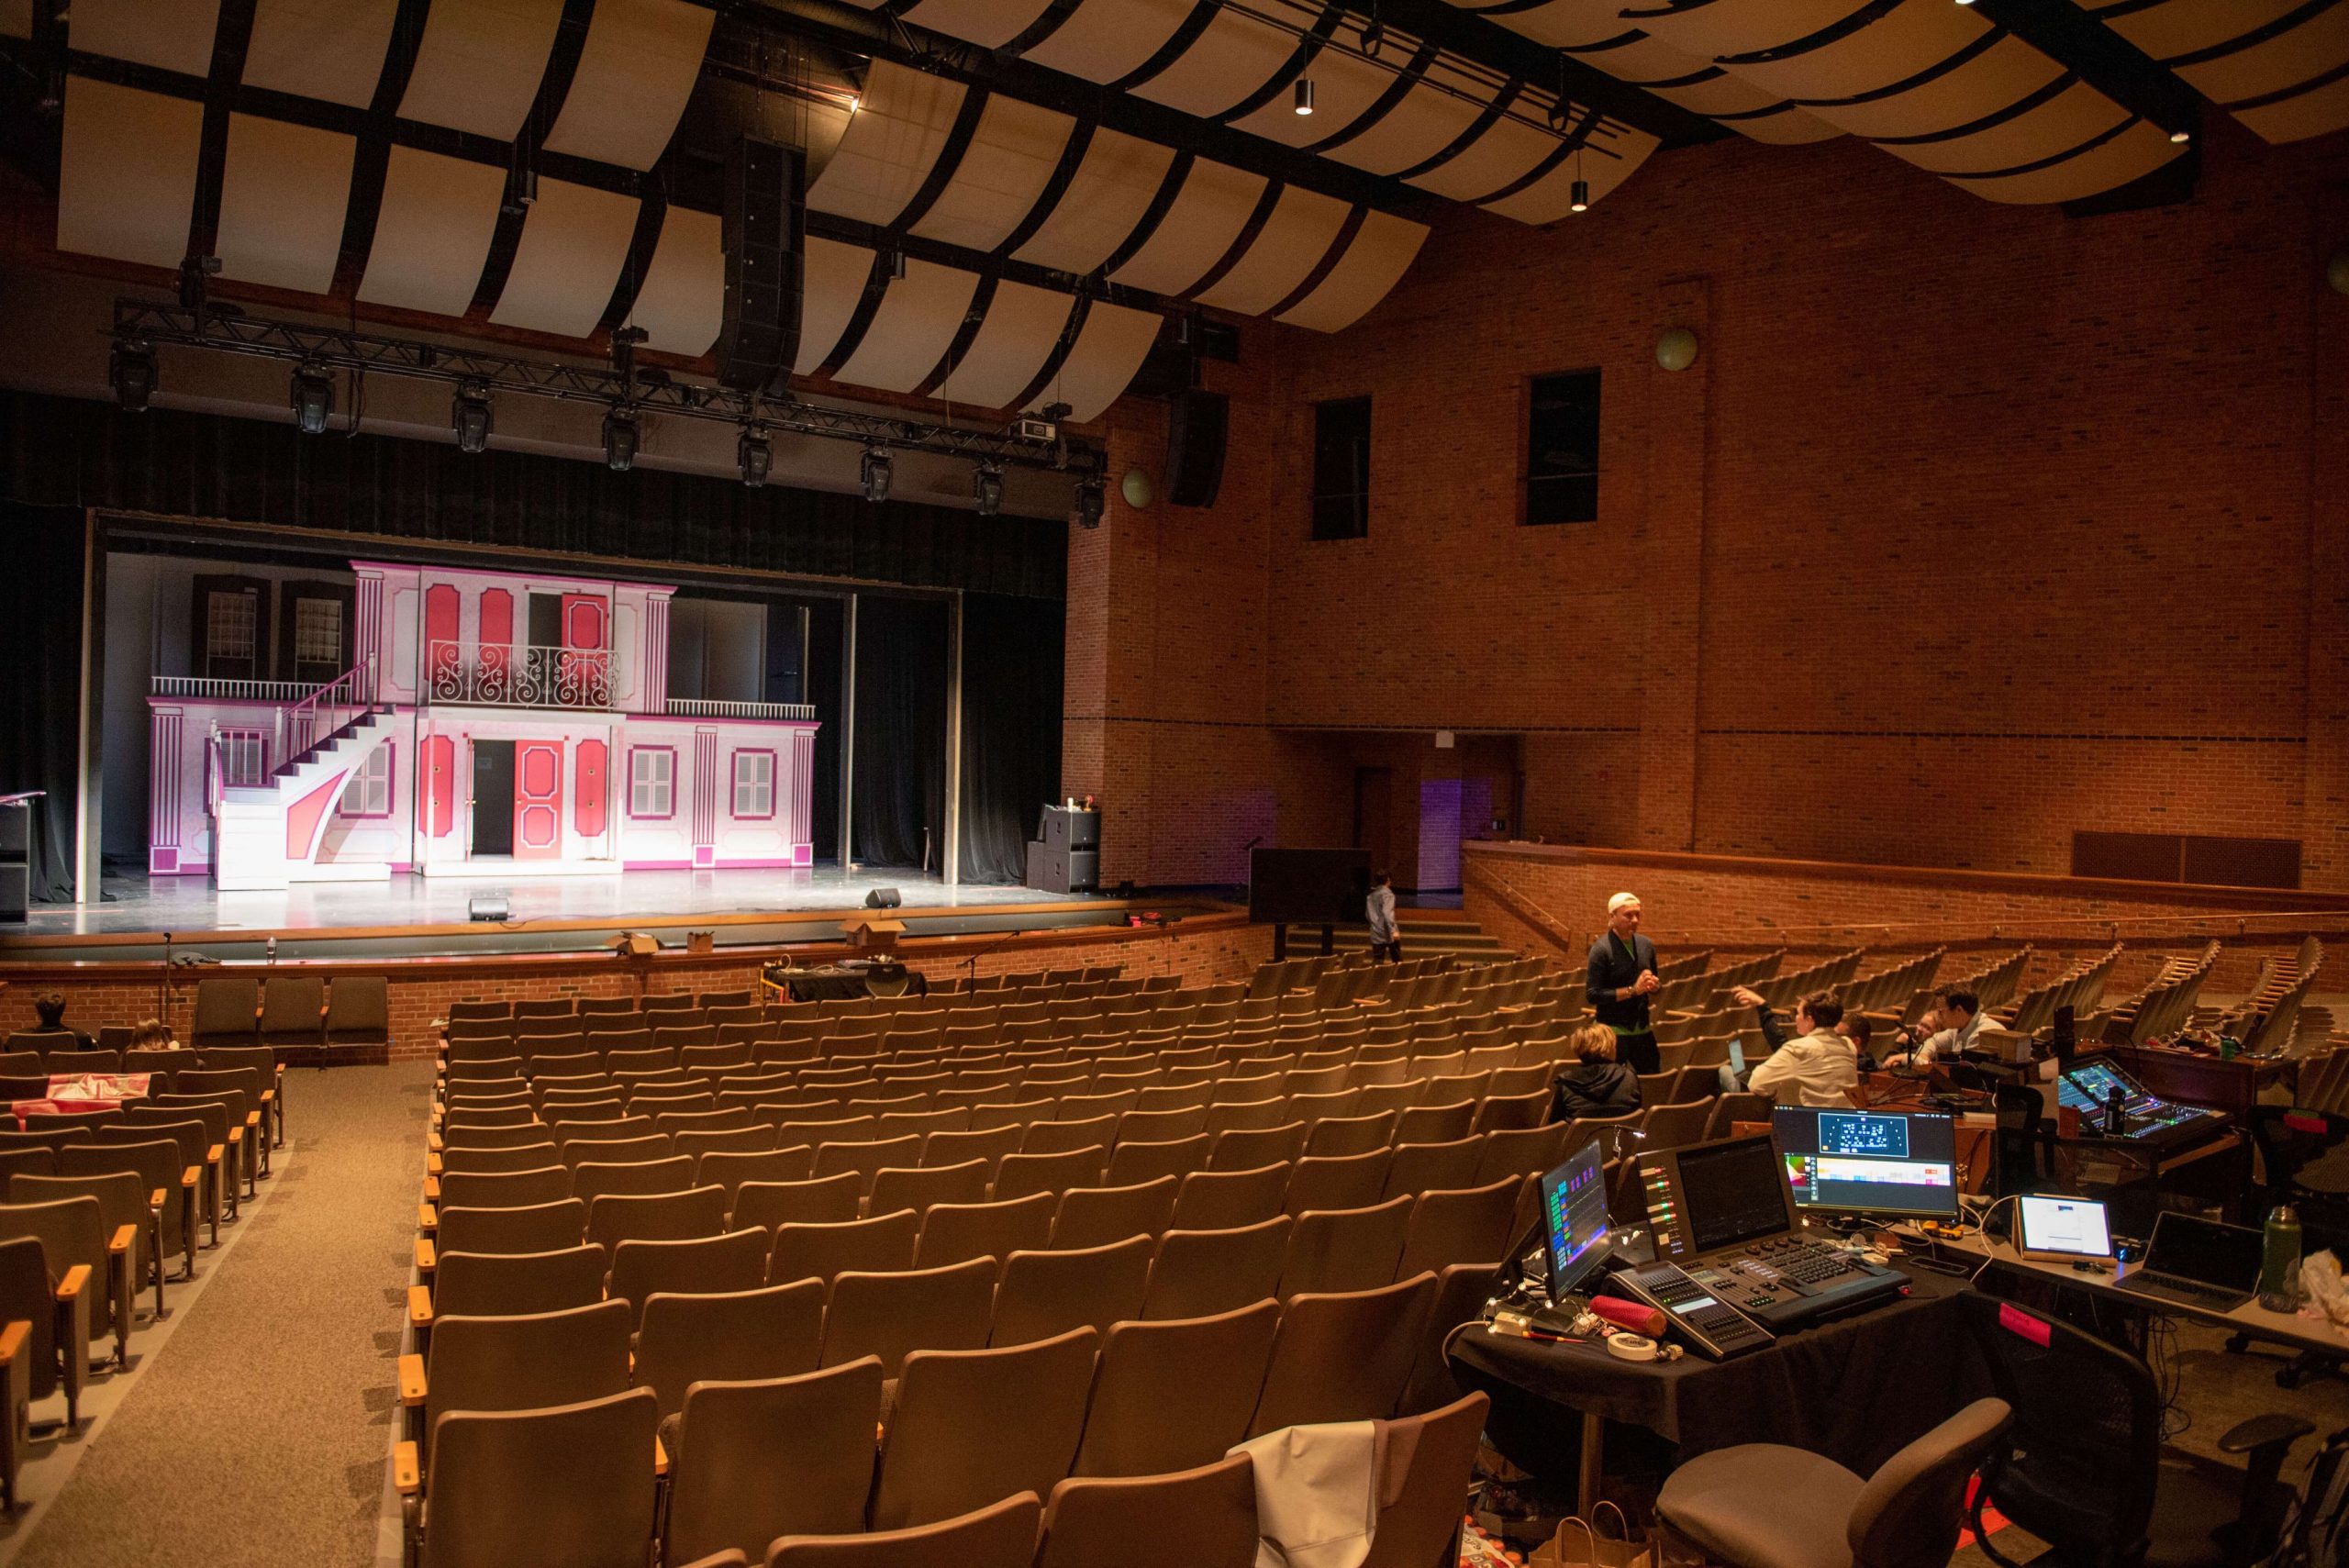 Legally Blonde set rental - Delta Nu house - Front Row Theatrical Rental - 800-250-3114